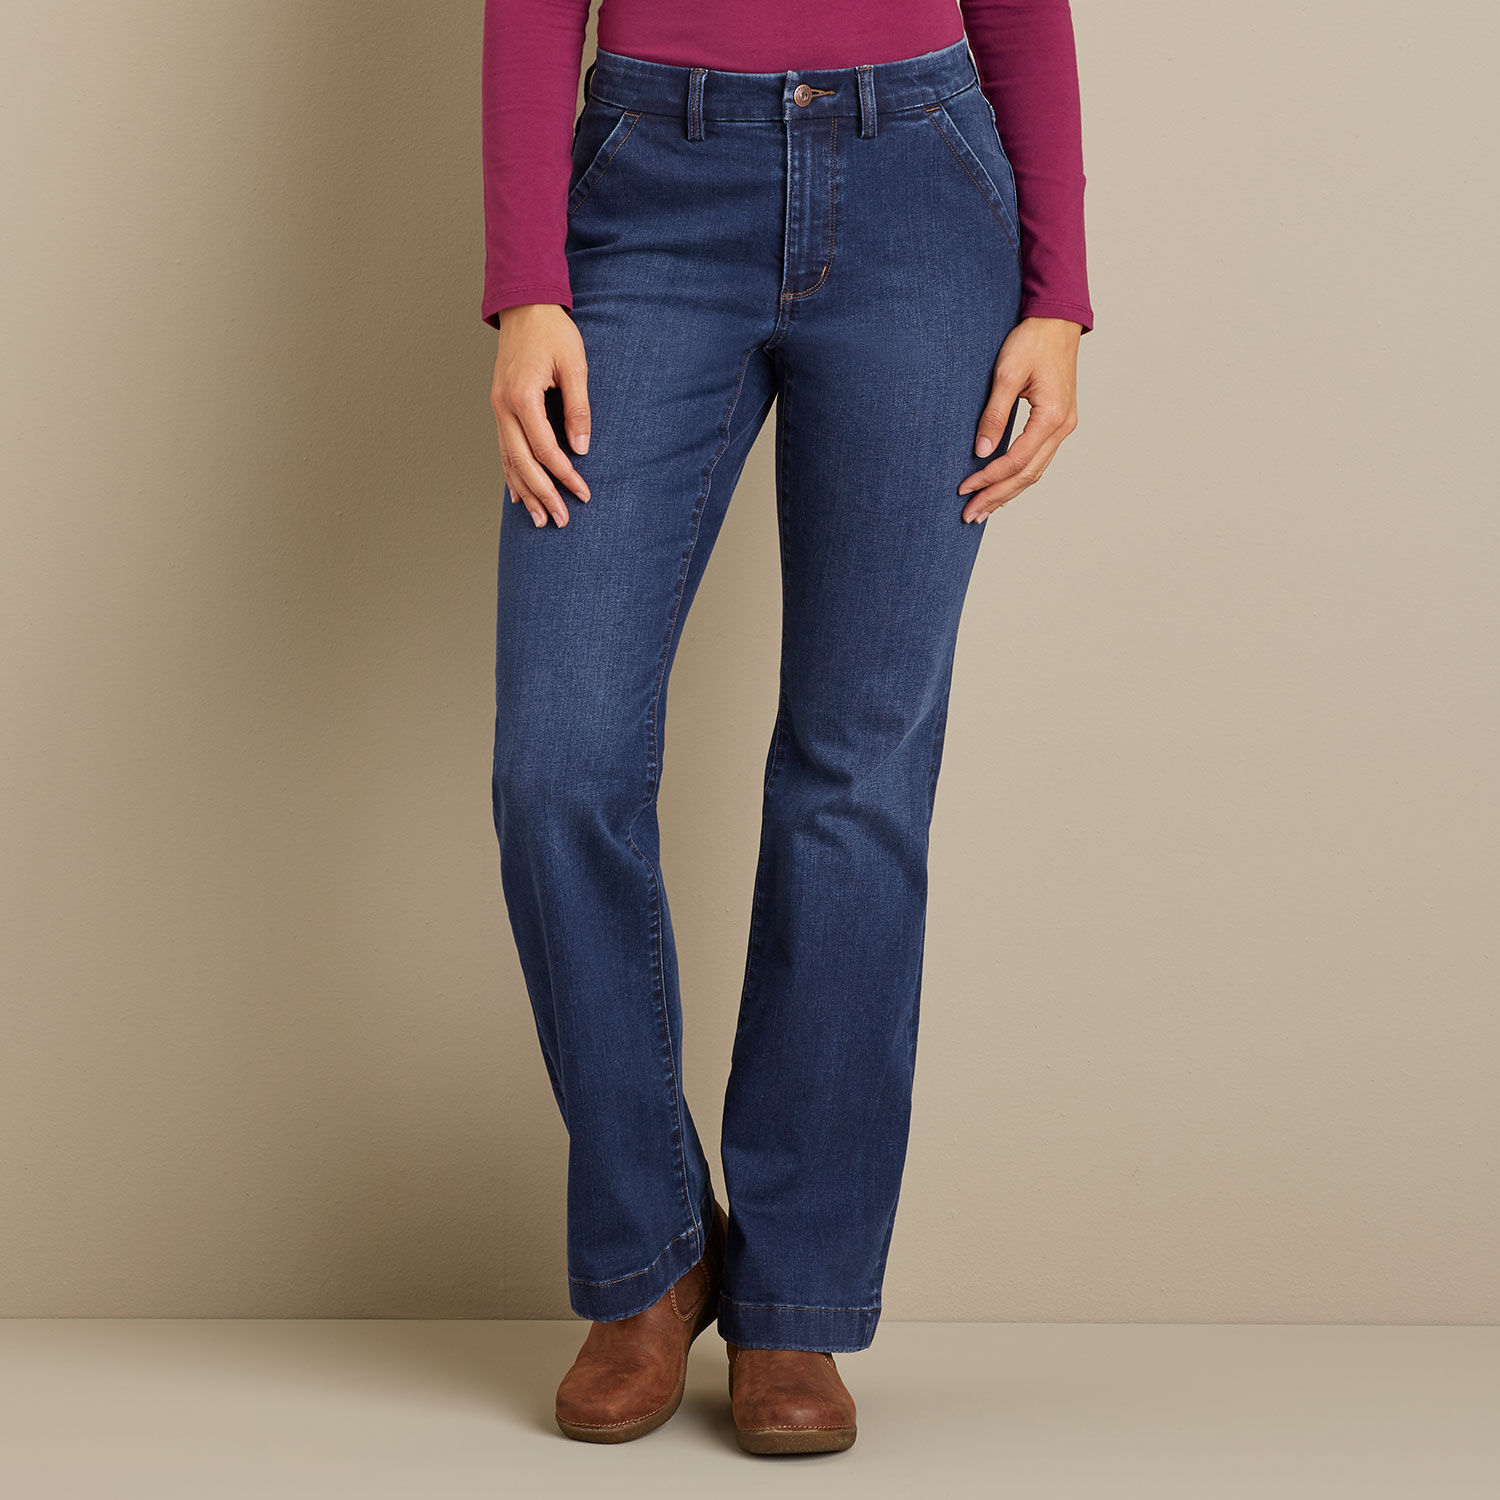 J.Crew Fall Try-On Haul: 7 Pieces To Try Now - The Mom Edit